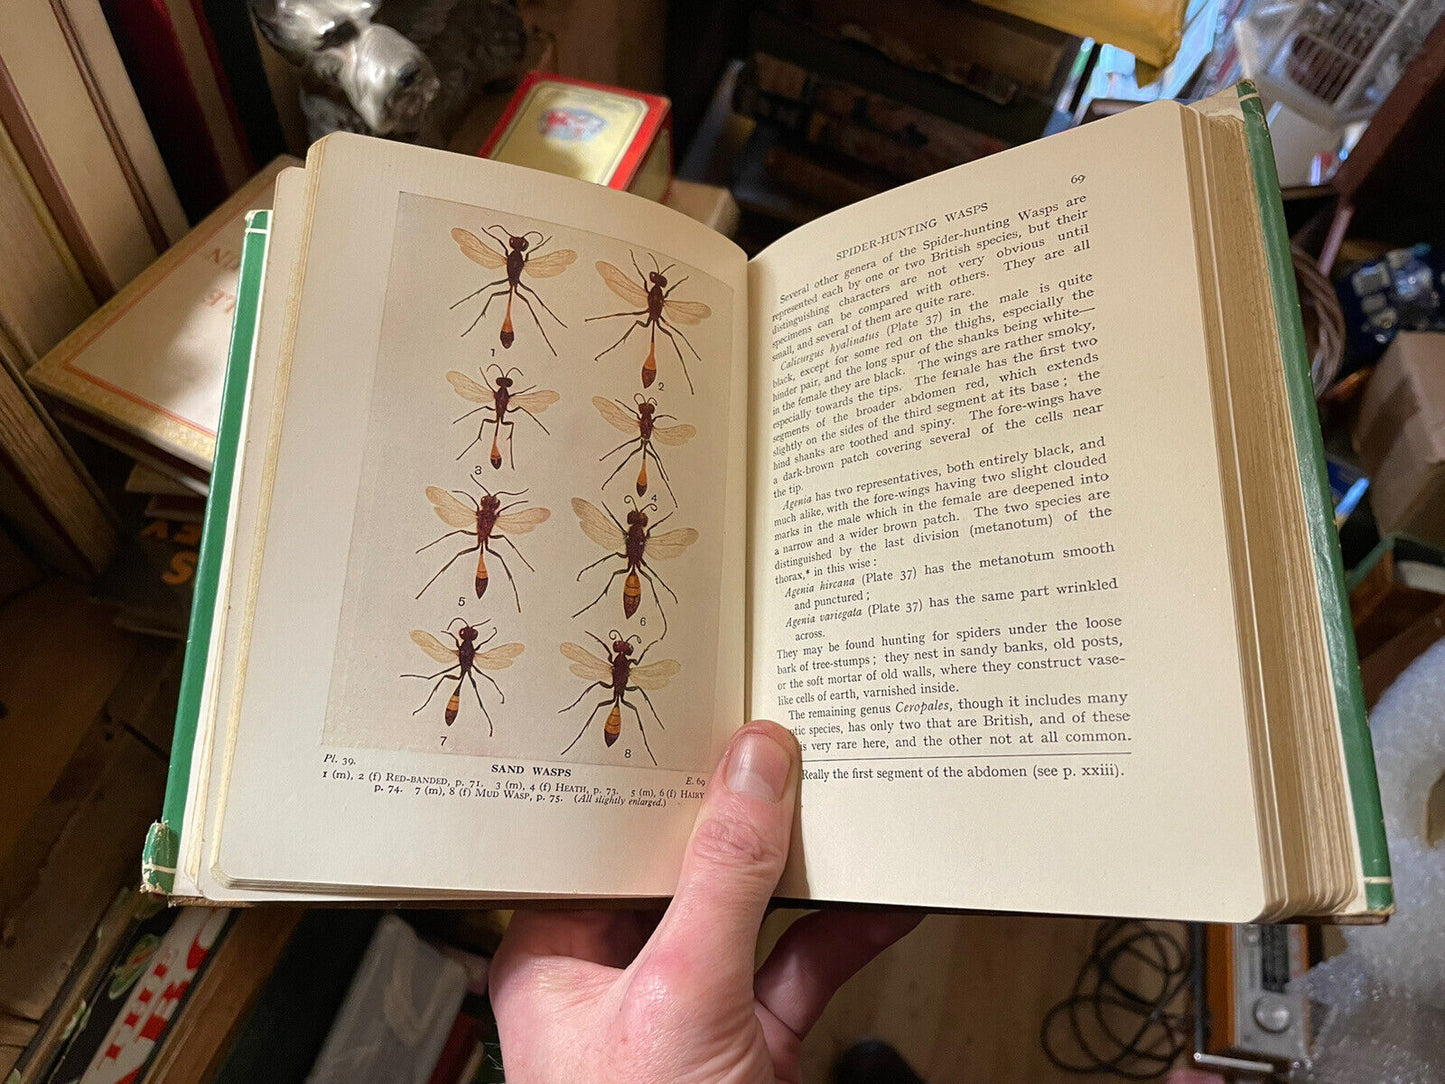 1932 Bees Wasps Ants &amp; Allied Insects : Edward Step : Wayside &amp; Woodland Series